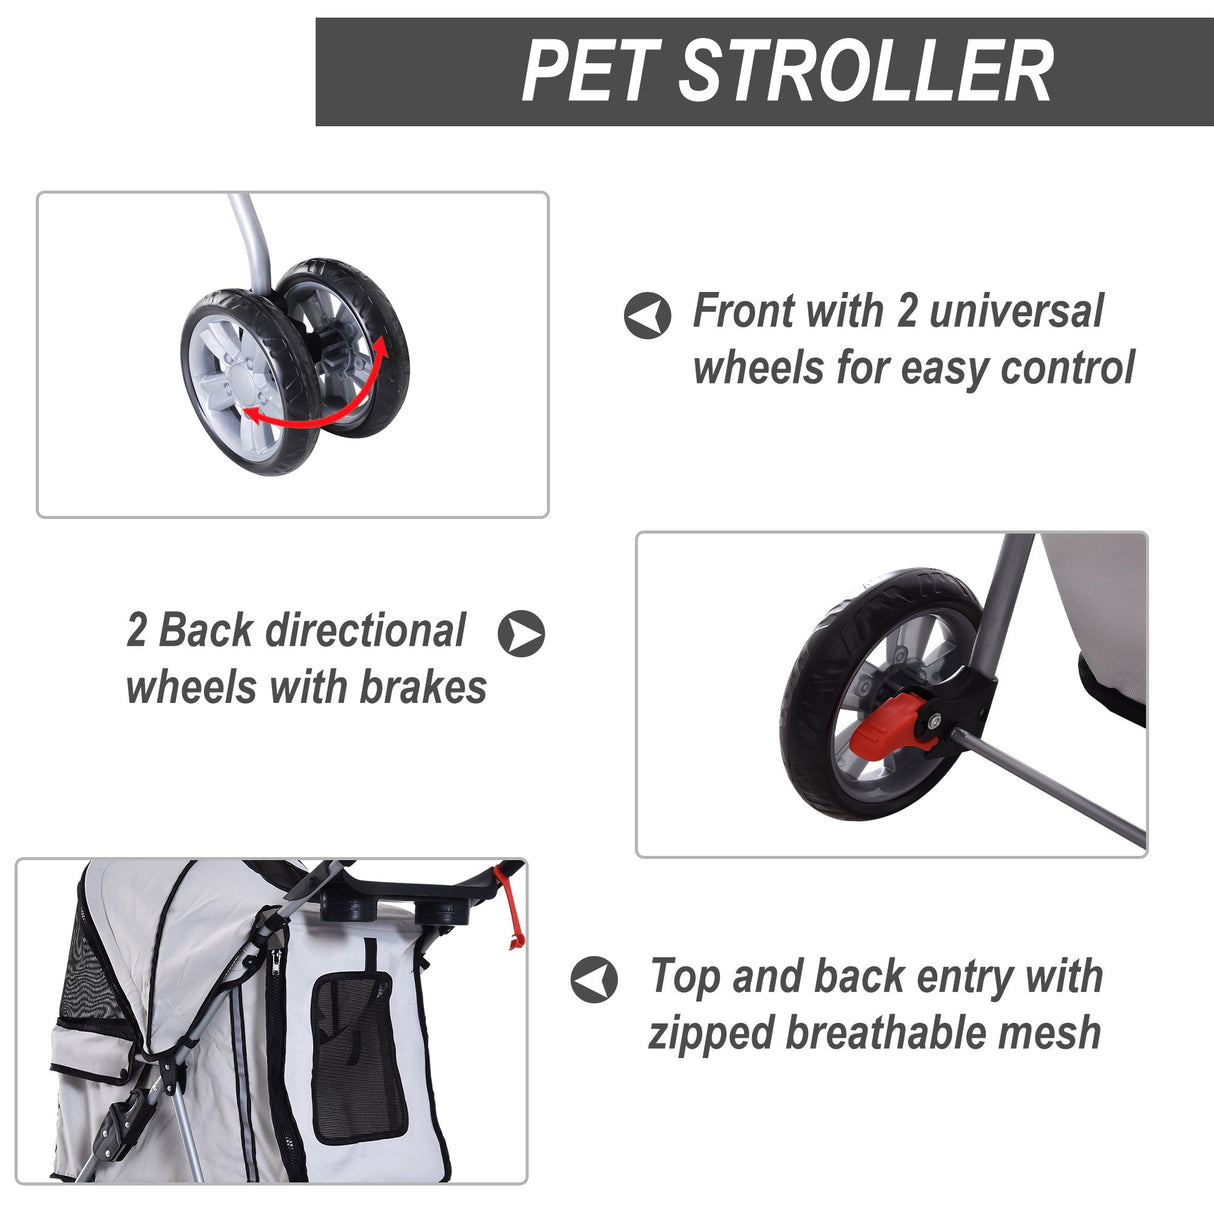 Dog Pushchair for Small Miniature Dogs Cats Foldable Travel Carriage with Wheels Zipper Entry Cup Holder Storage Basket, PawHut, Grey